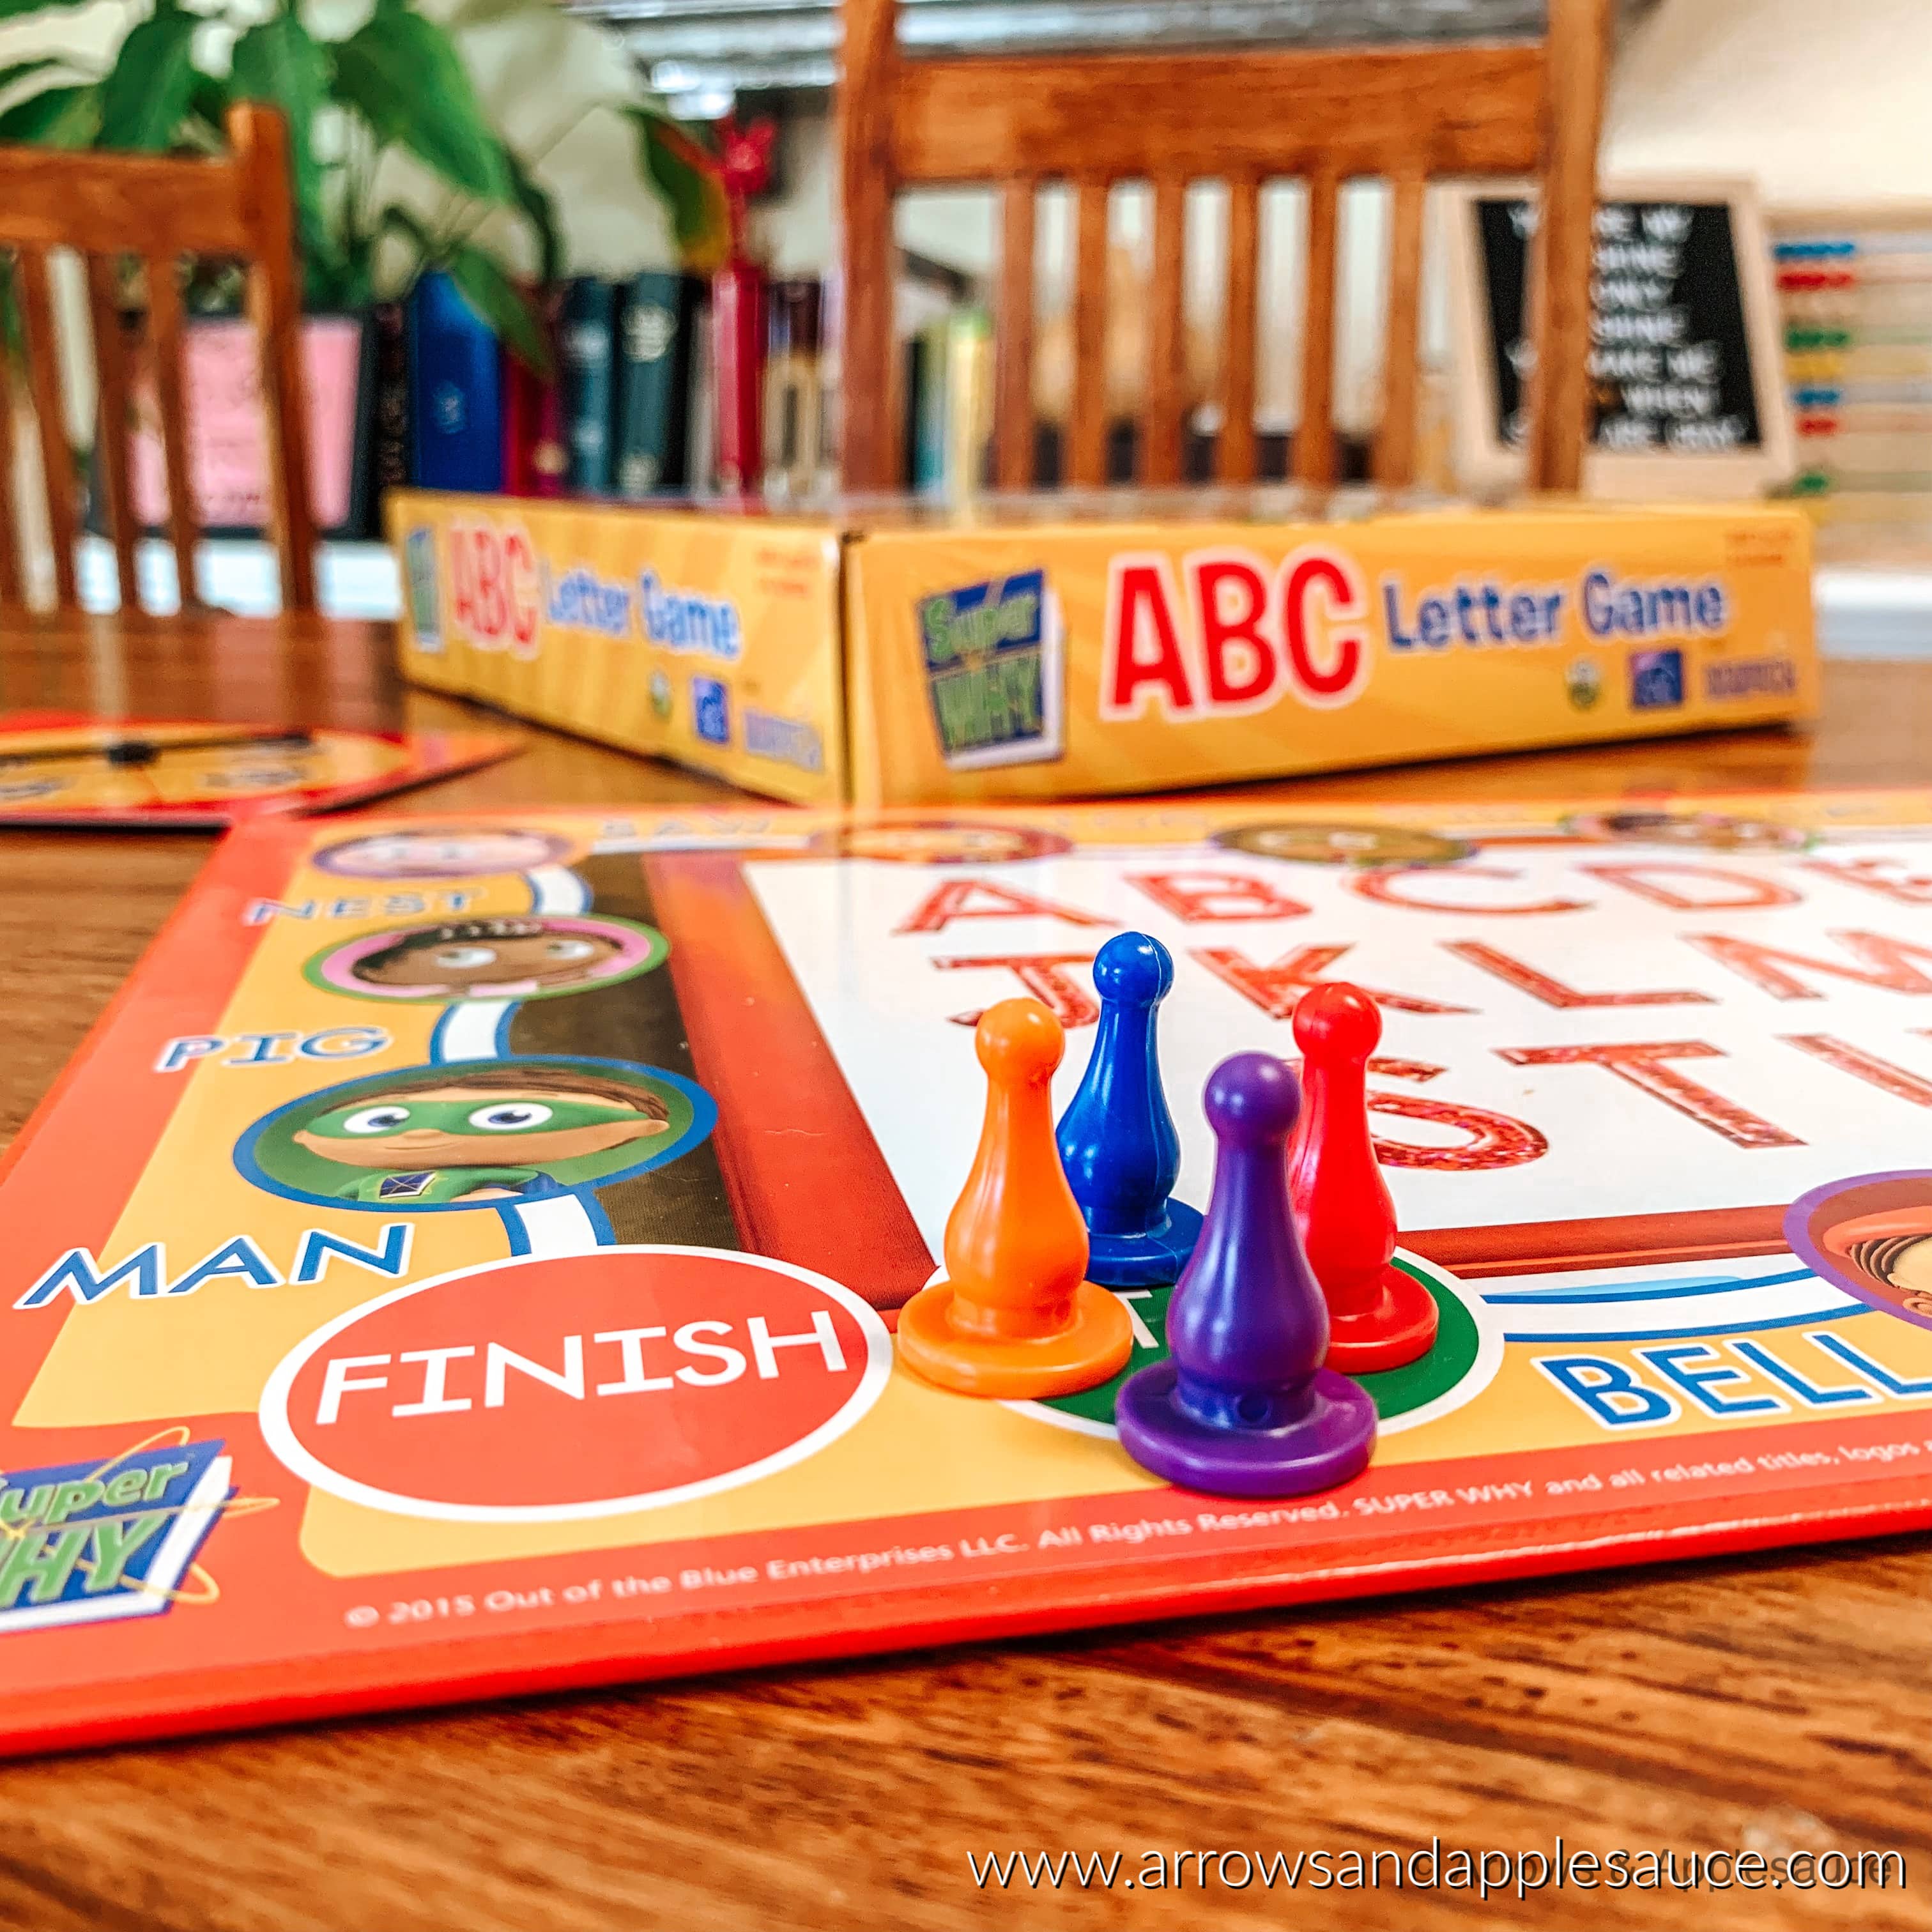 Gameschooling is a great wait to beat the summer brain drain! Check out our favorite preschool alphabet games to keep learning fun this summer! #gameschooling #alphabetgames #educationalgames #teachingabcs #preschoolgames #summerbraindrain #learningathome #homeschooltips #superwhy